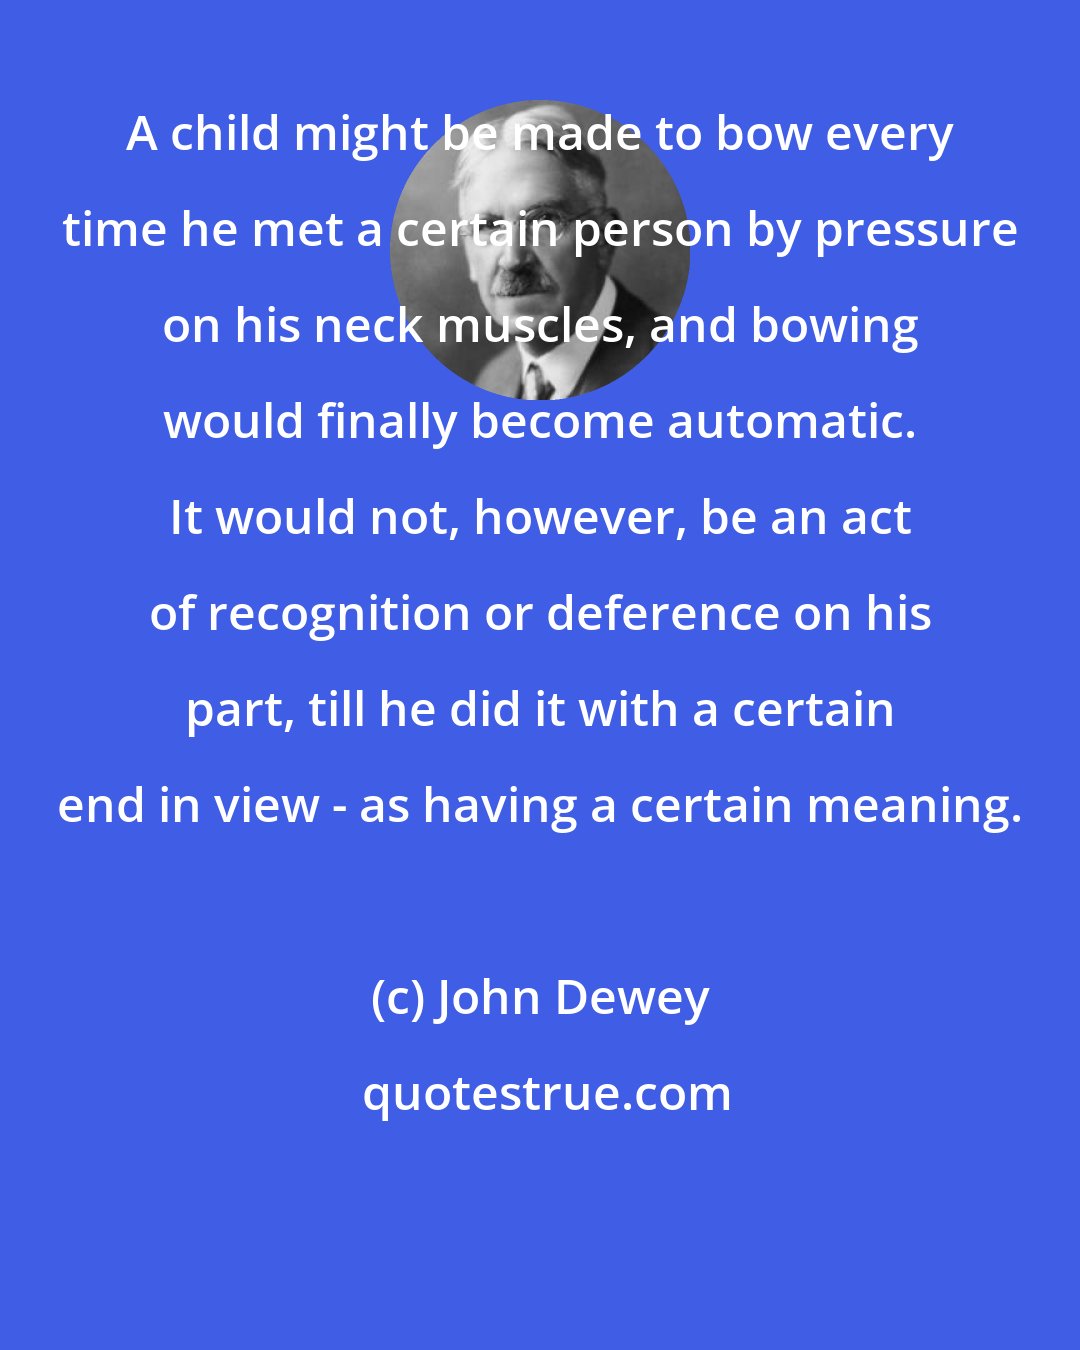 John Dewey: A child might be made to bow every time he met a certain person by pressure on his neck muscles, and bowing would finally become automatic. It would not, however, be an act of recognition or deference on his part, till he did it with a certain end in view - as having a certain meaning.